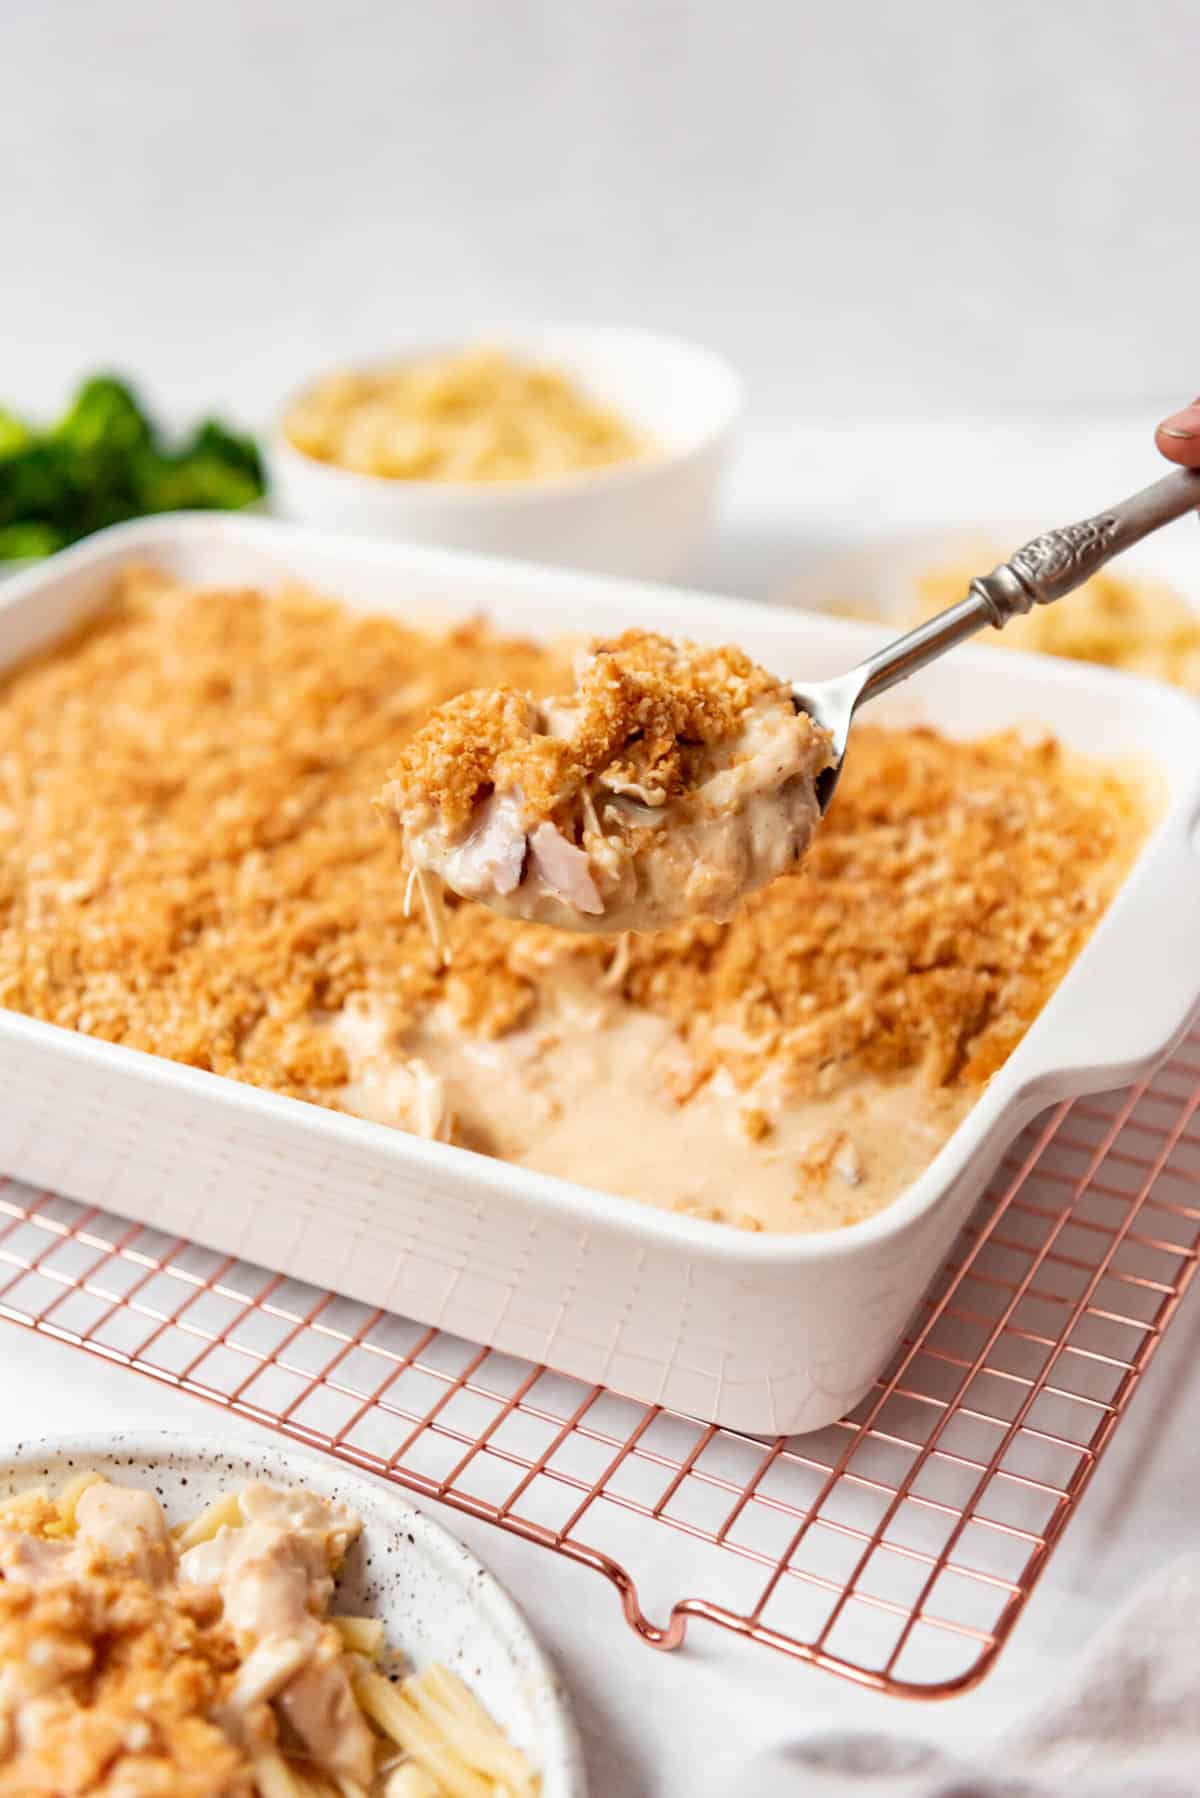 A serving spoon lifting up a spoonful of cordon bleu casserole in front of the baking dish.